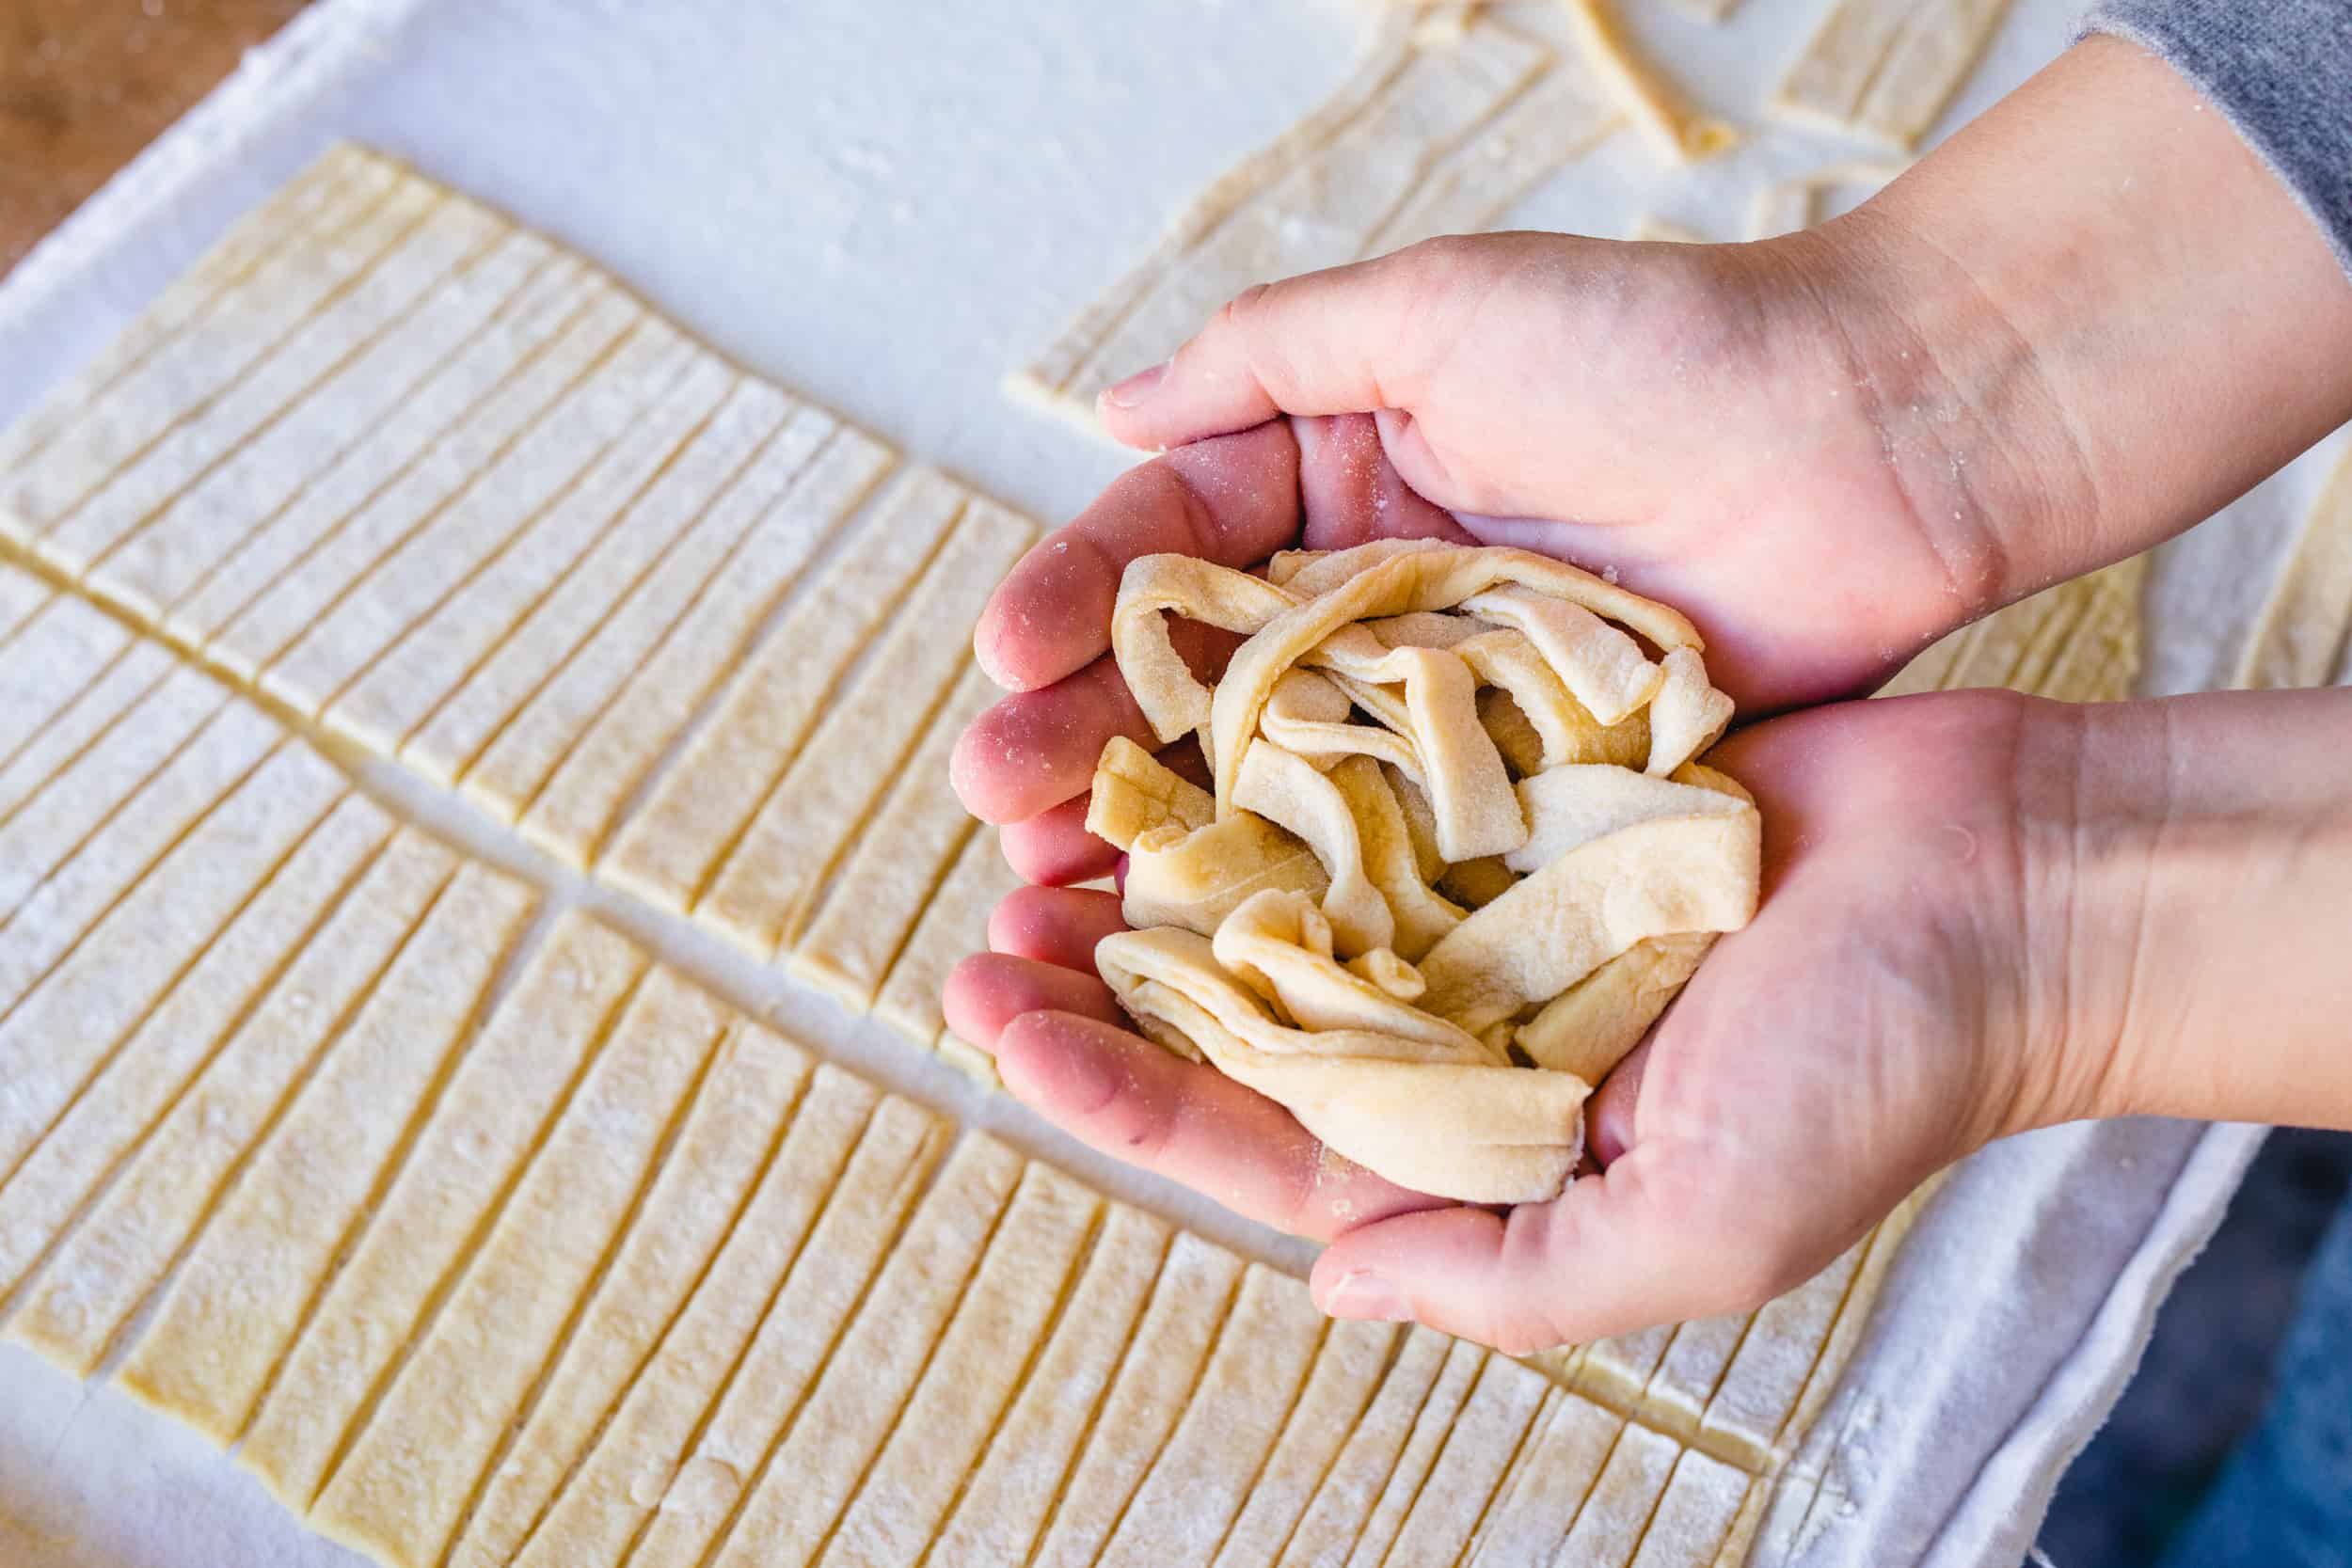 Ashley holds fresh cut egg noodles in the palms of her hands.